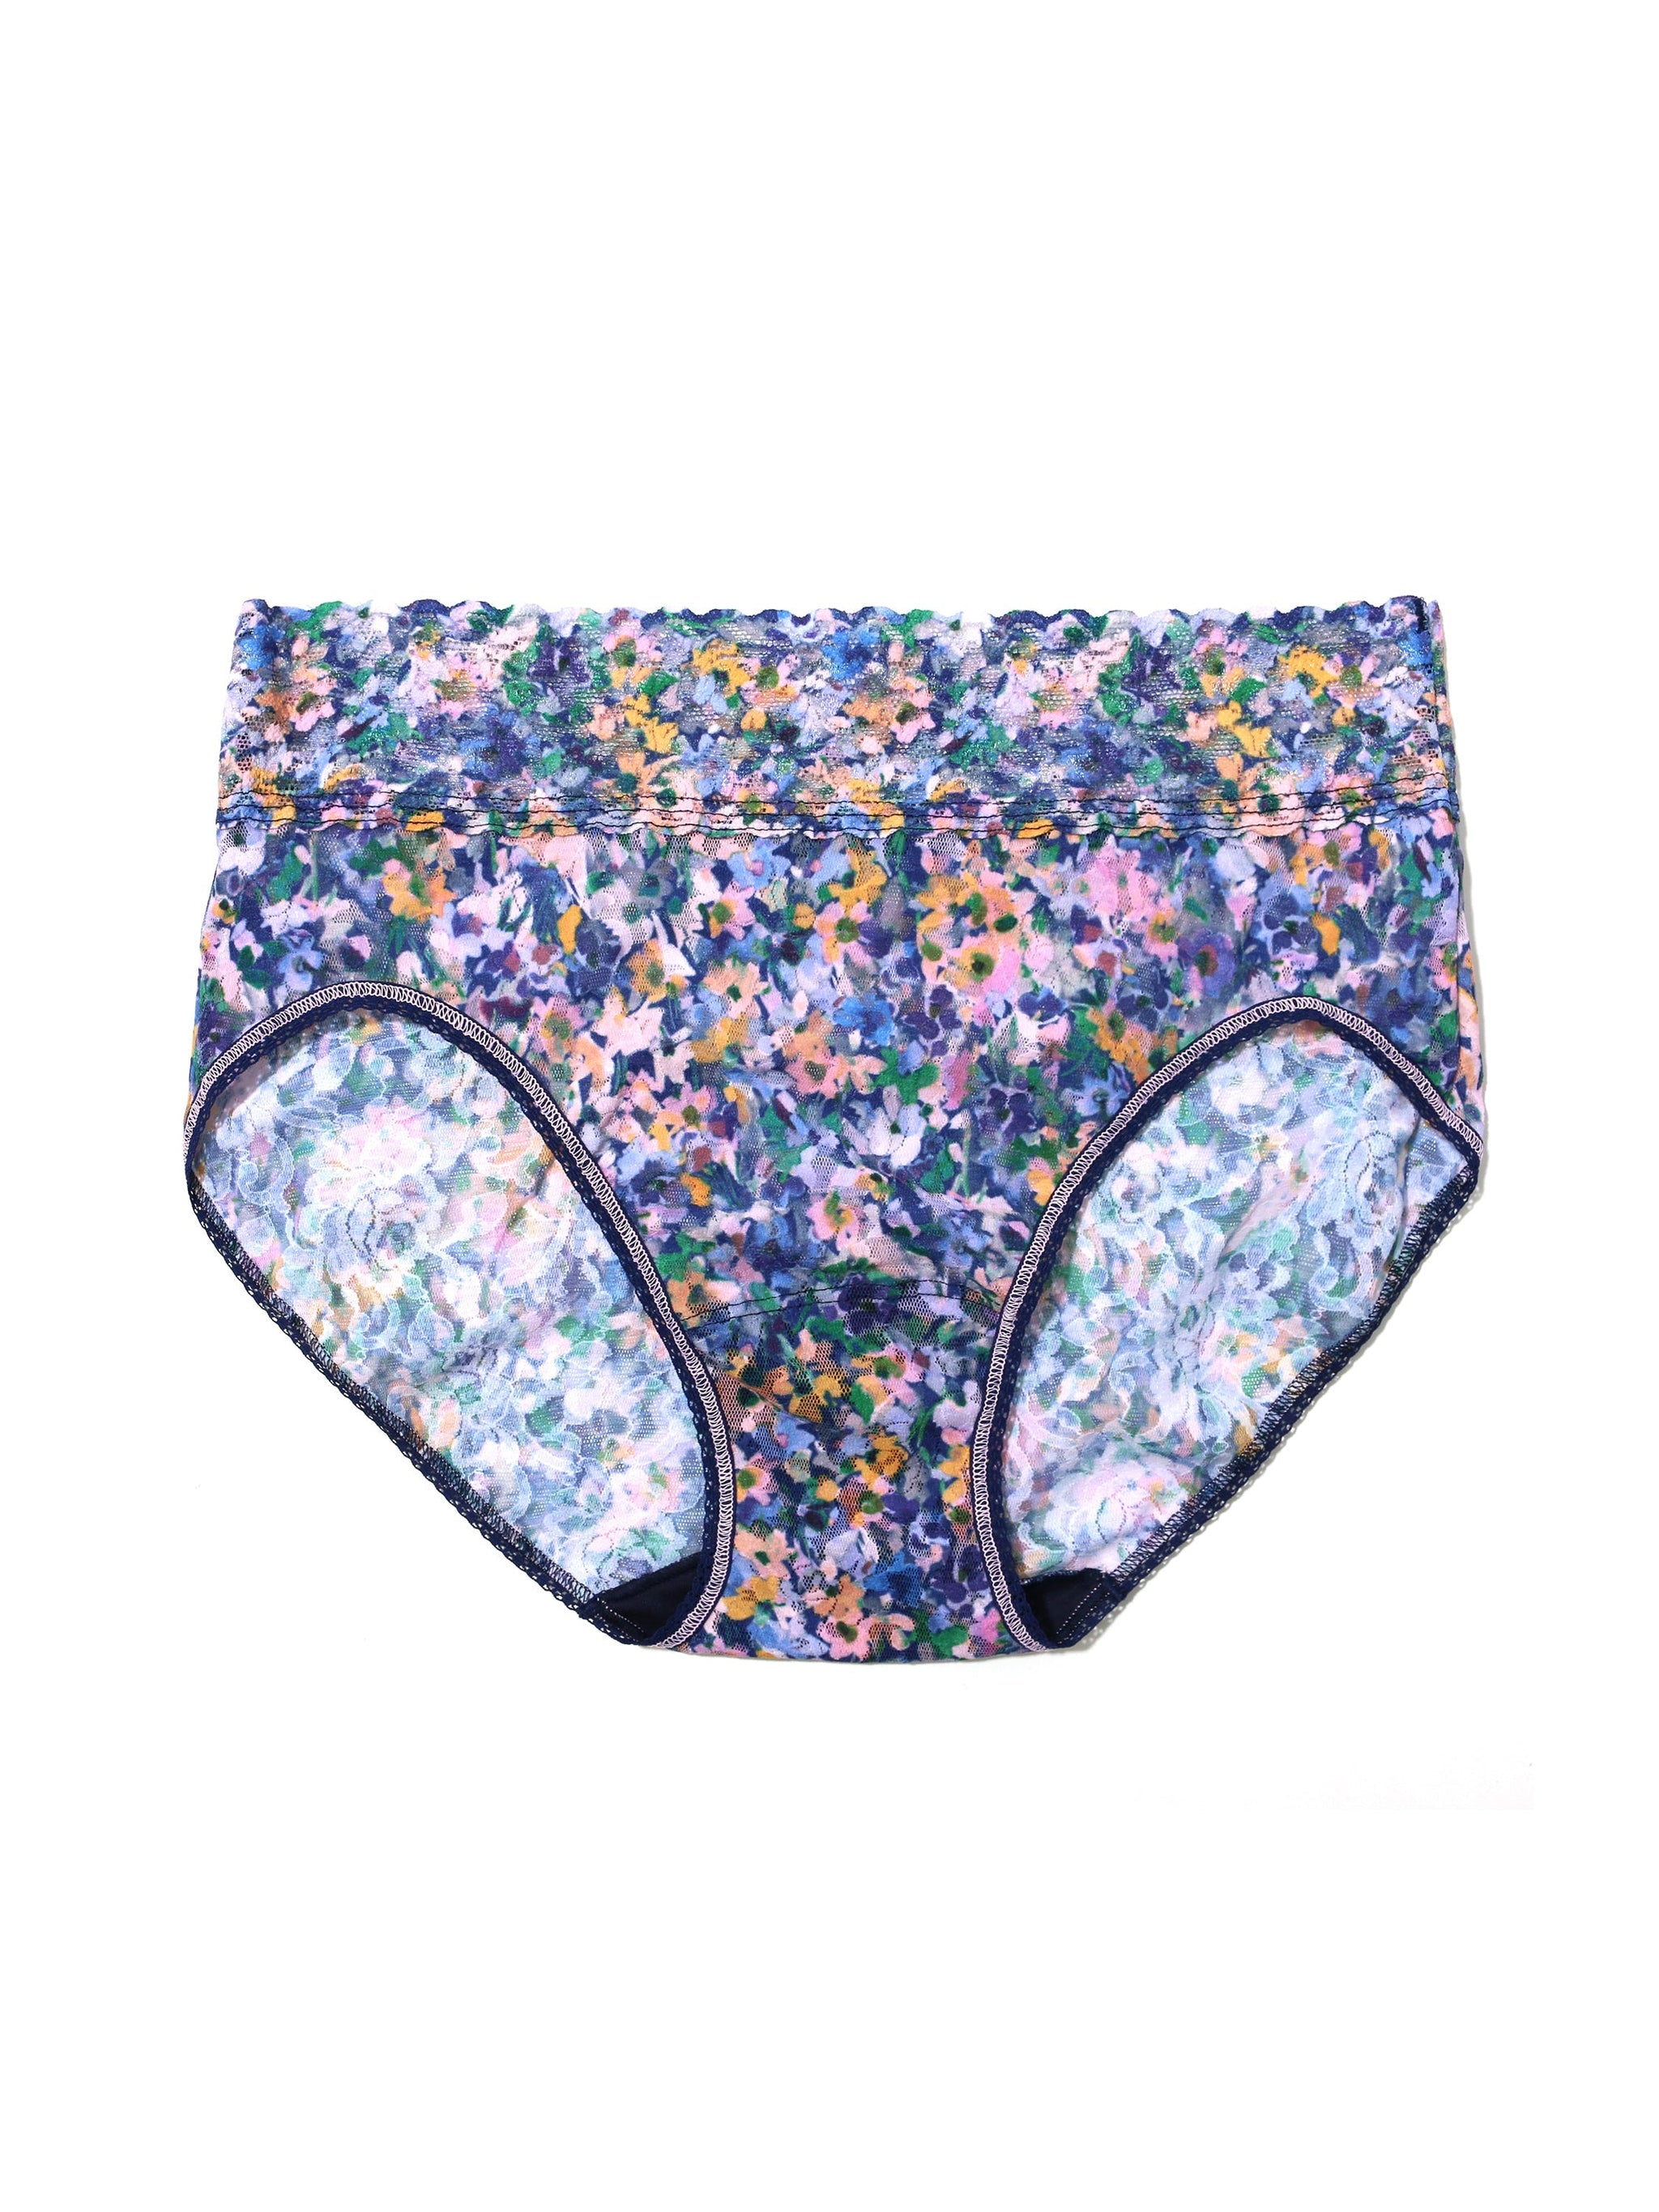 Printed Signature Lace French Brief Staycation Sale